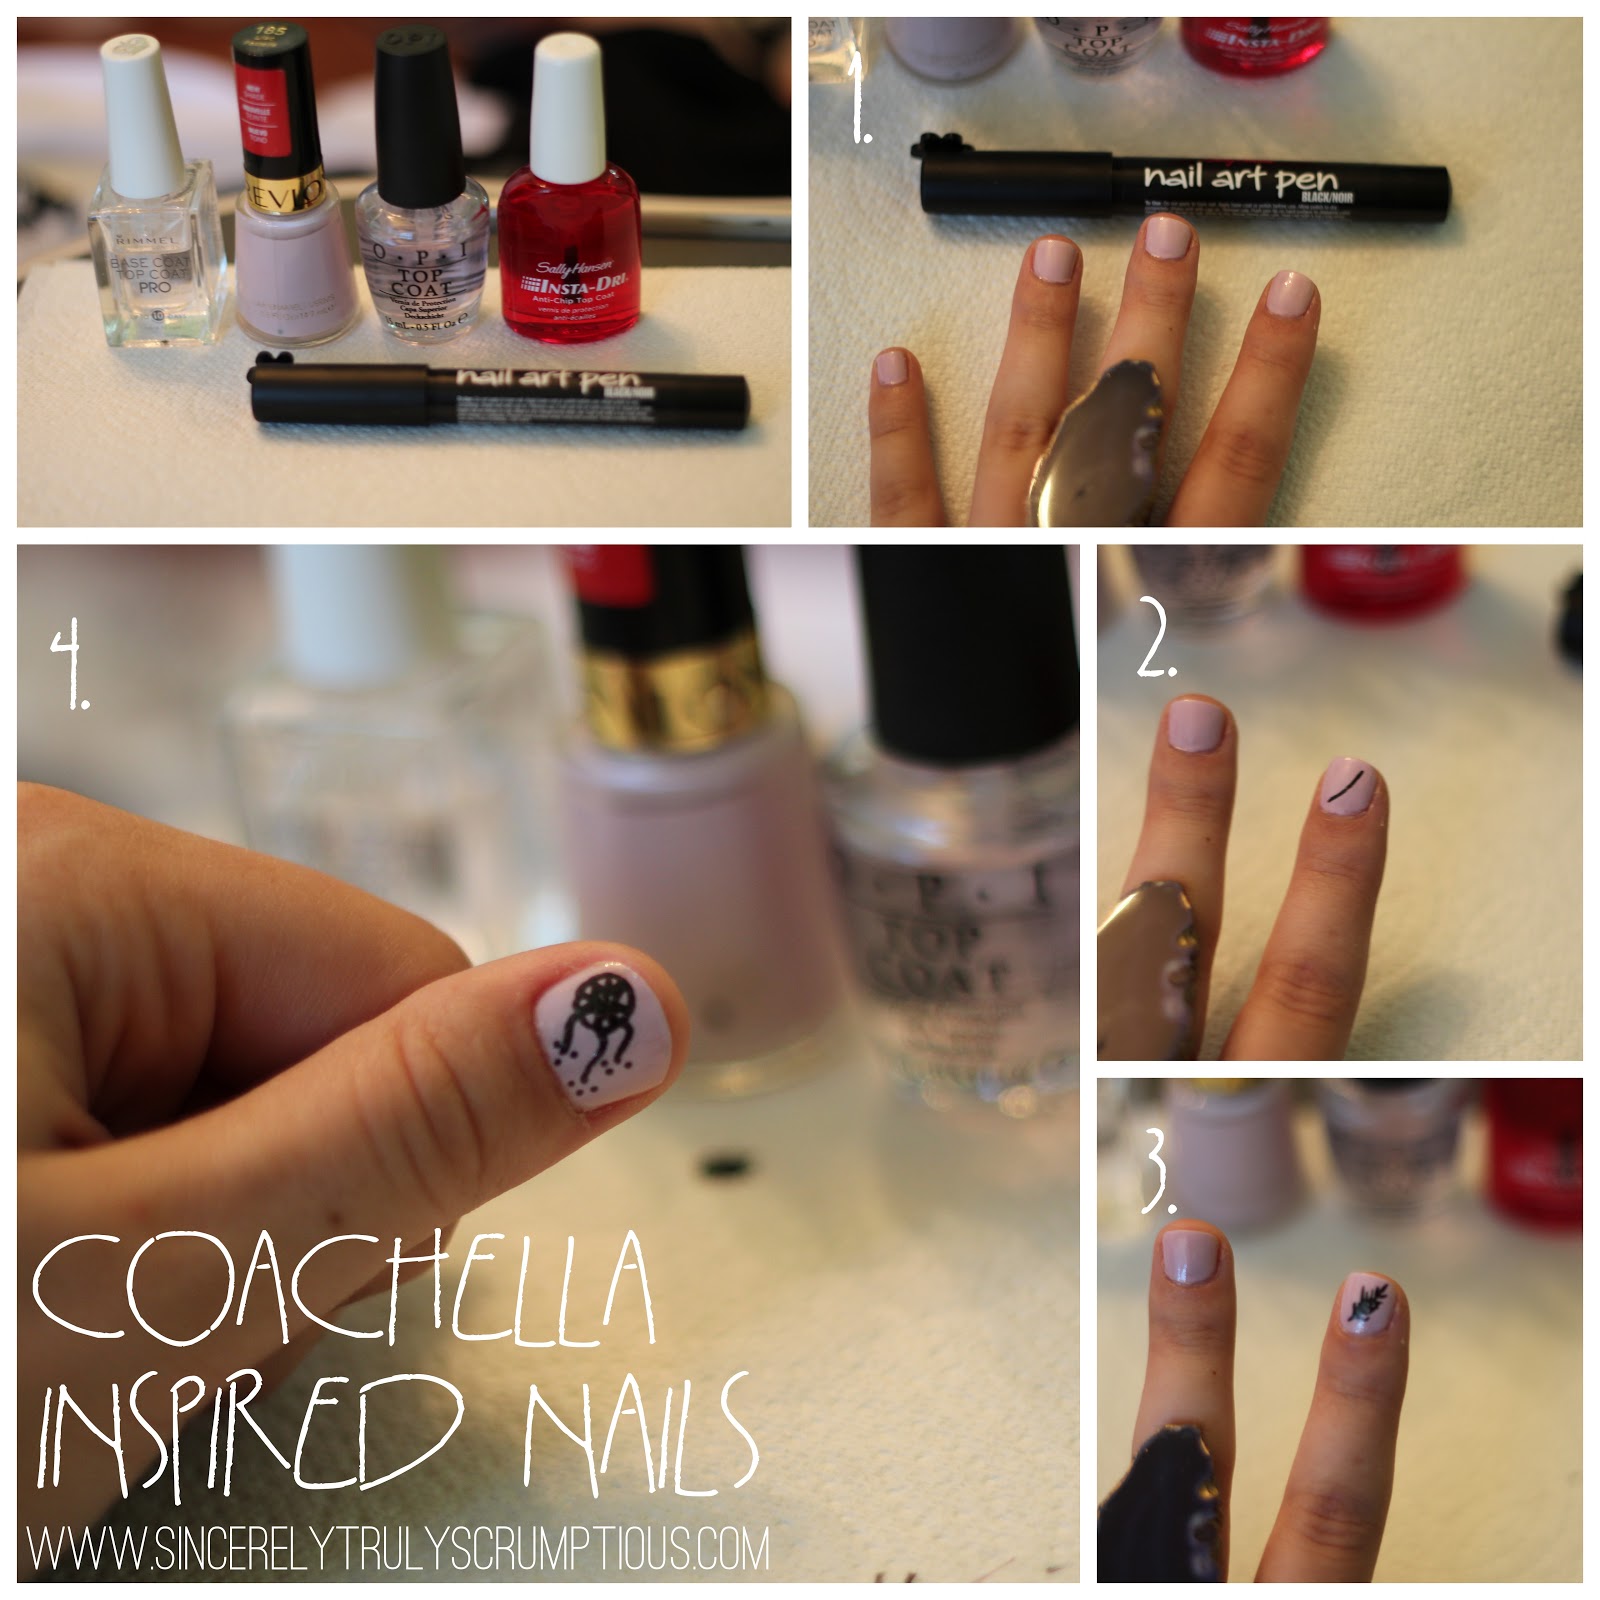 sincerely, truly scrumptious: DIY: Coachella Inspired Nails